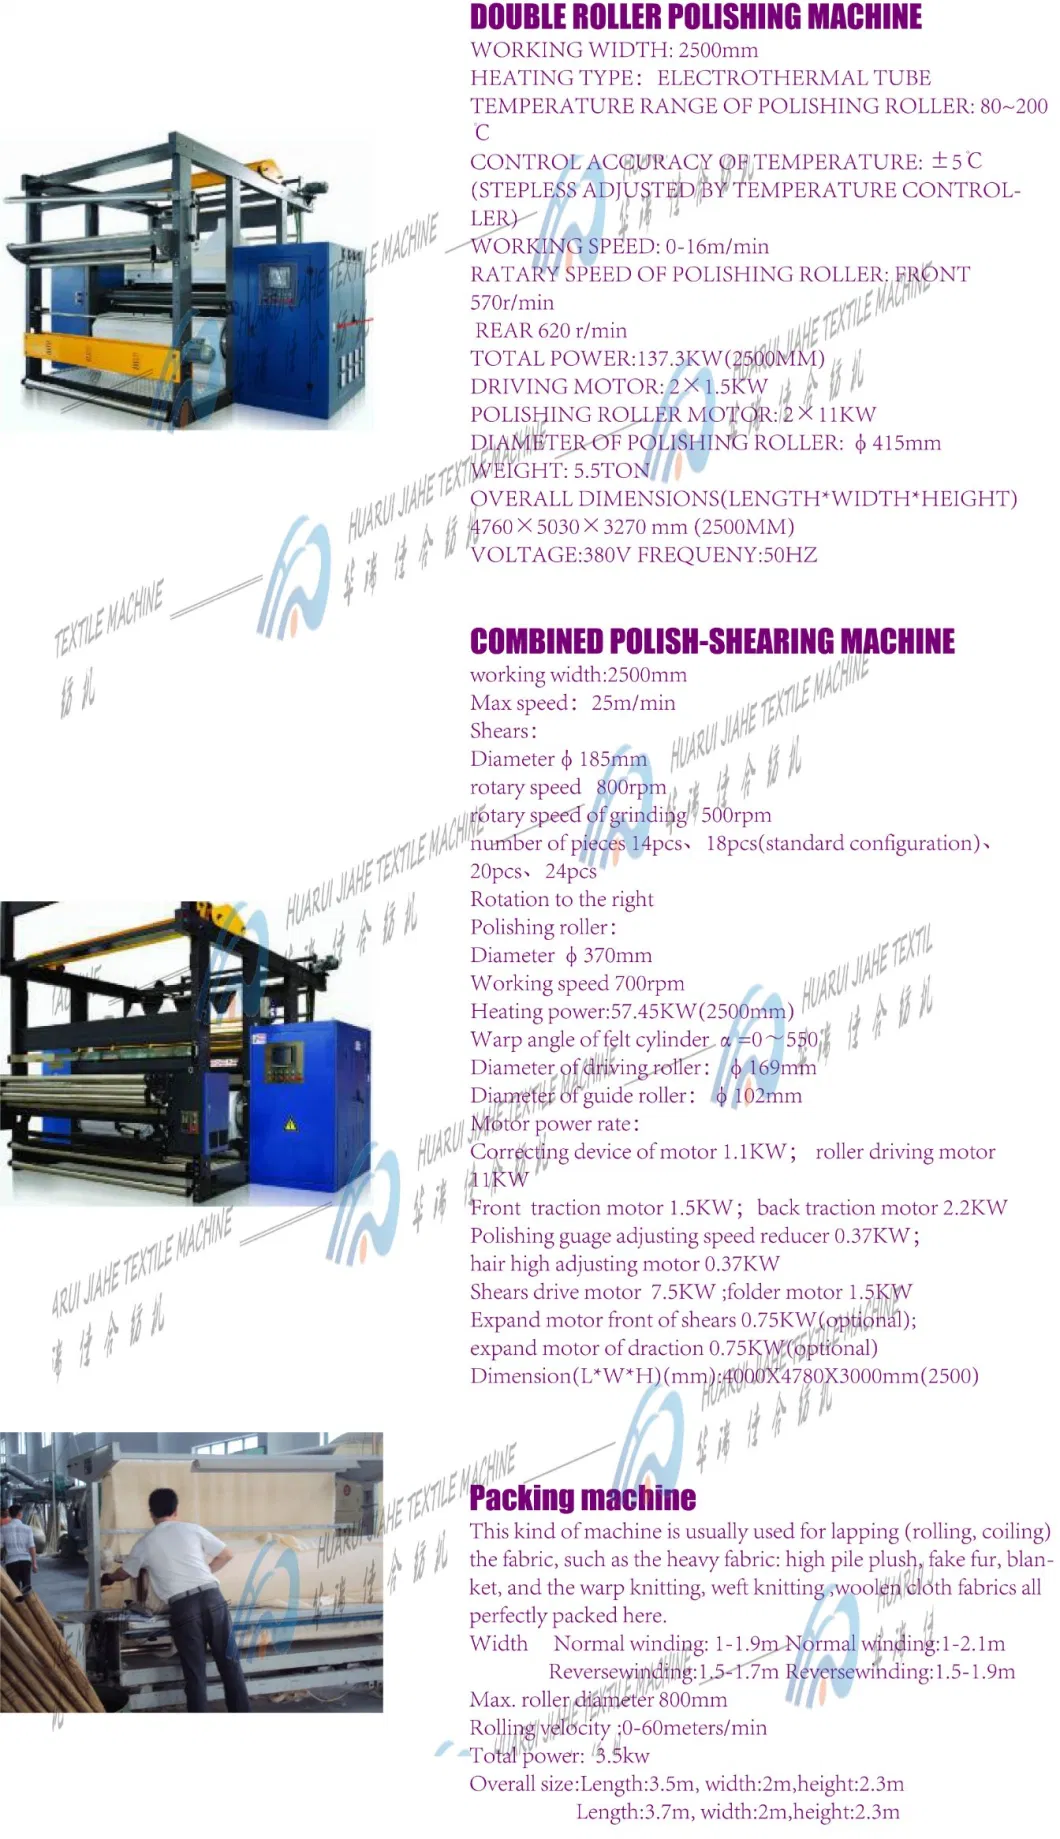 Burn-out Machine for Mink Blanket Production Line with Printing Machine, Washing Machine and Stenter Setting Machine